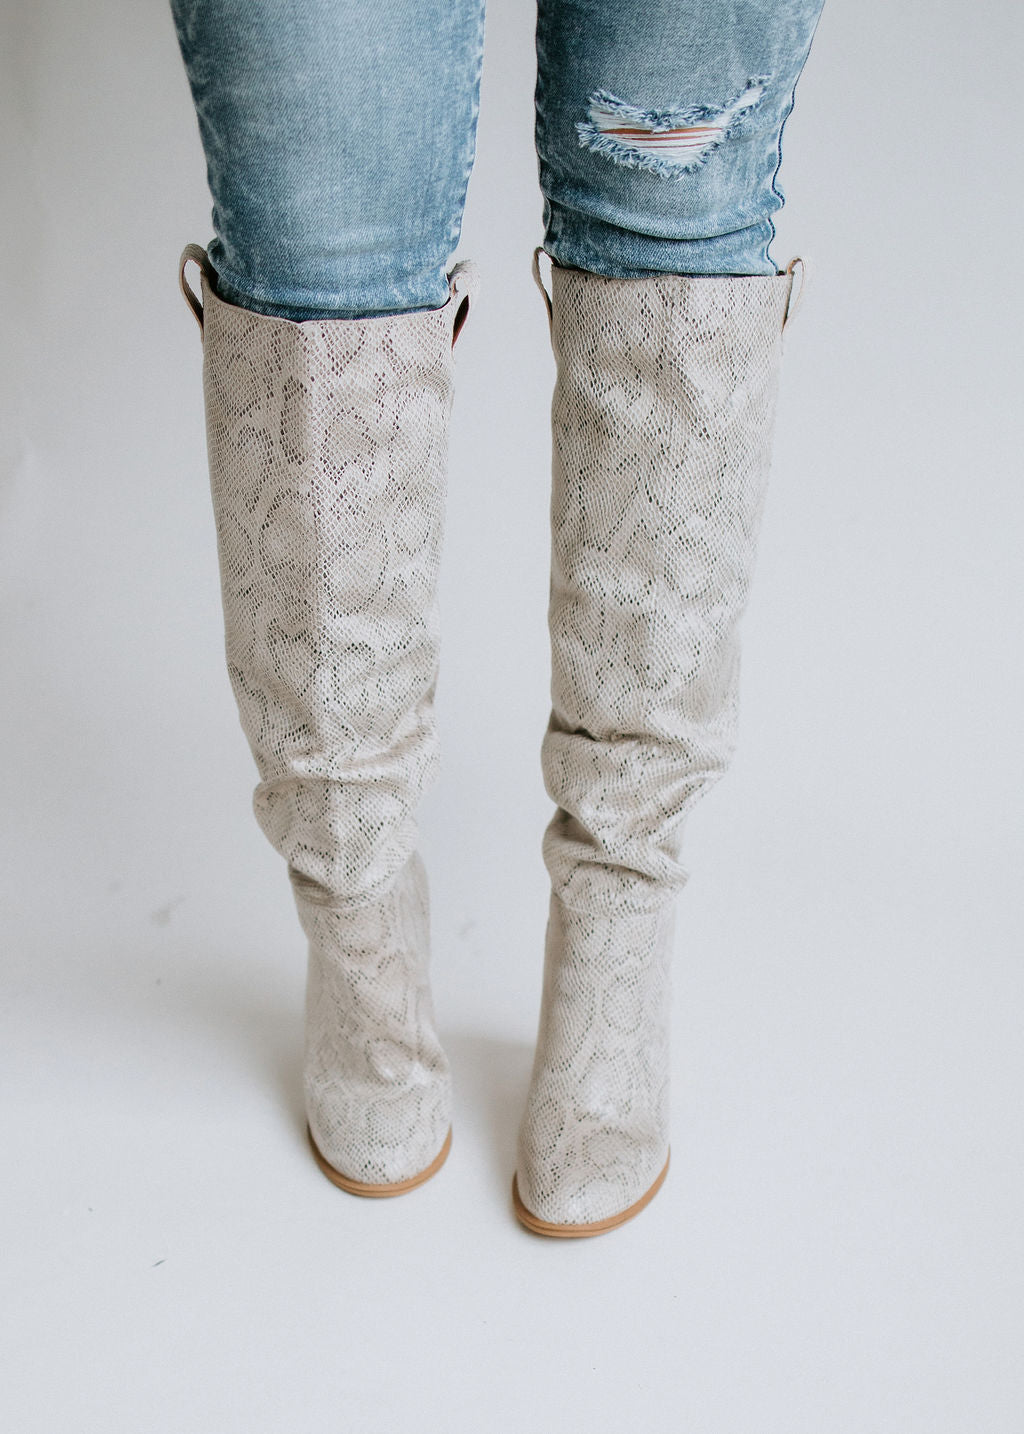 Snake My Day Knee High Boot - ONLINE ONLY FINAL SALE